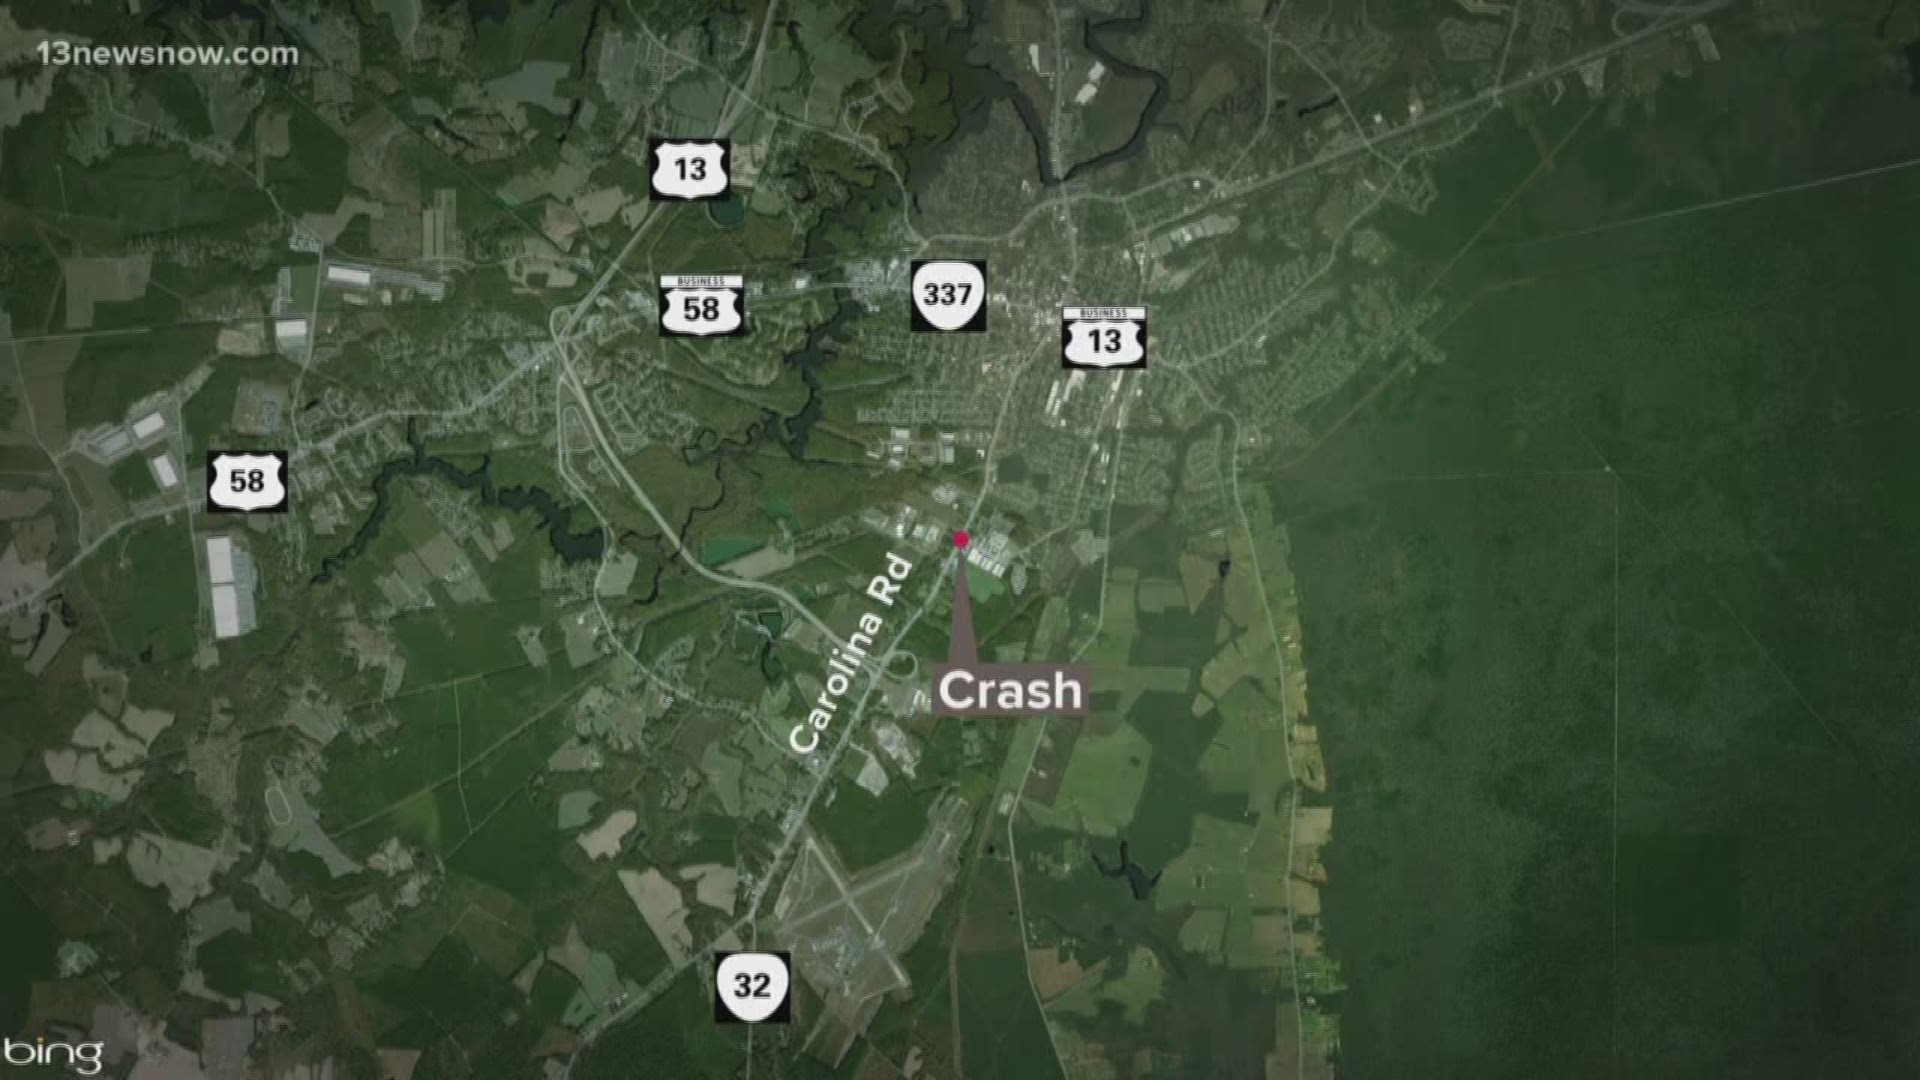 A fatal crash at the intersection of Carolina and Dill roads caused some lane closures, Suffolk officials said.